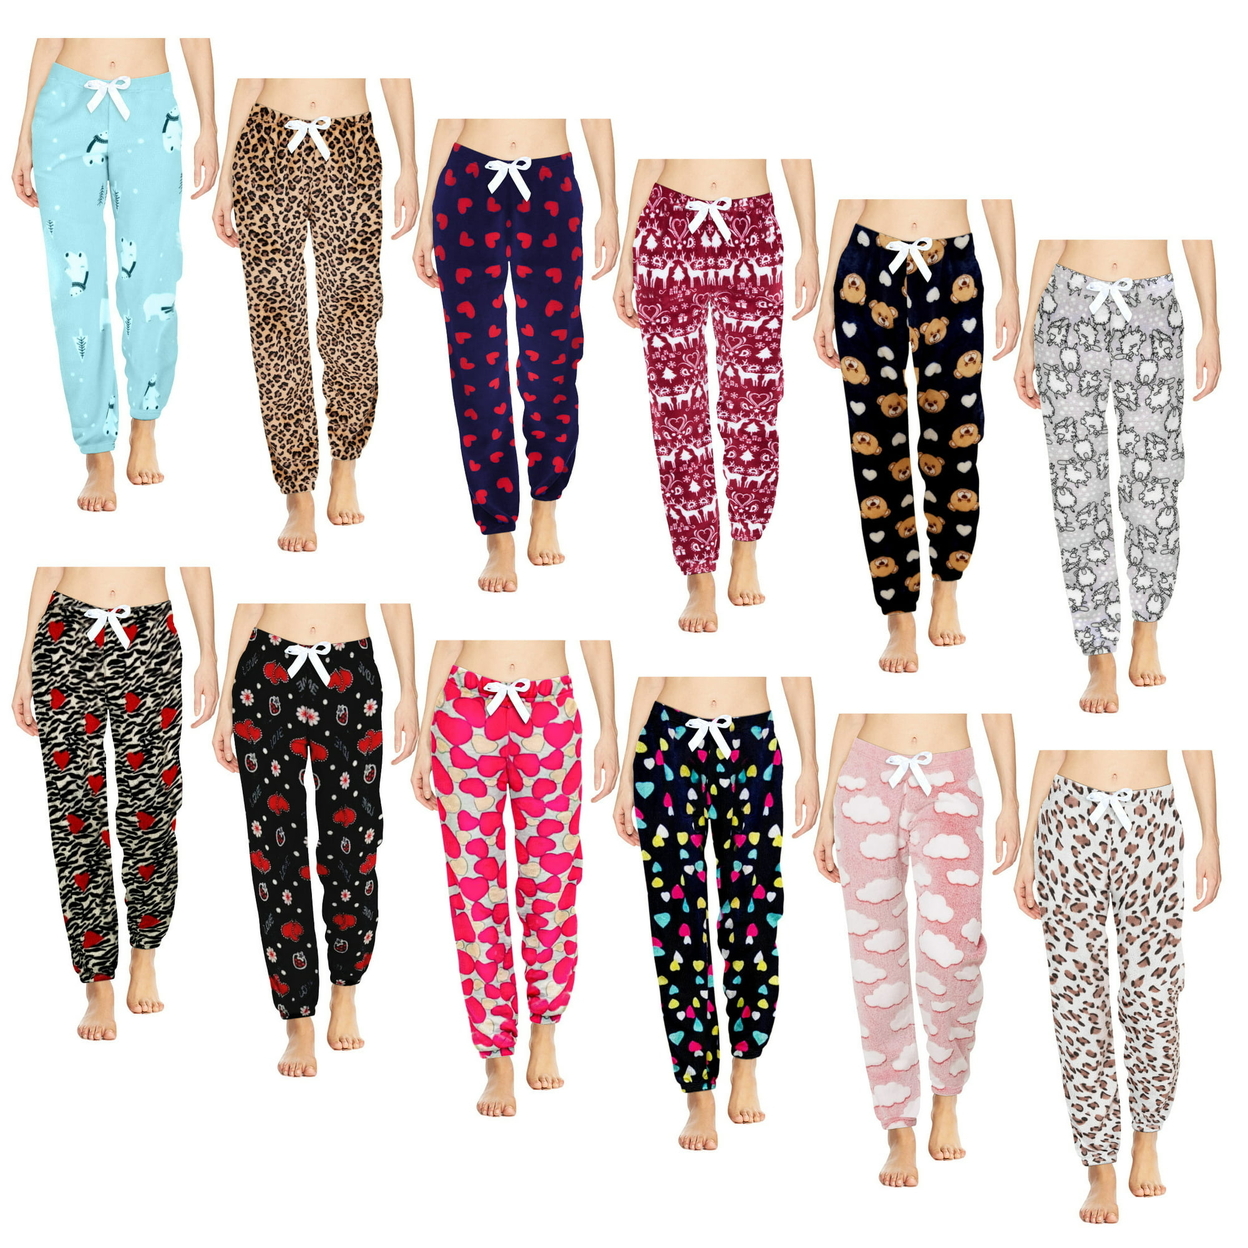 Multi-Pack: Women's Printed Ultra-Soft Comfy Stretch Micro-Fleece Pajama Lounge Pants - 3-pack, Love, Large